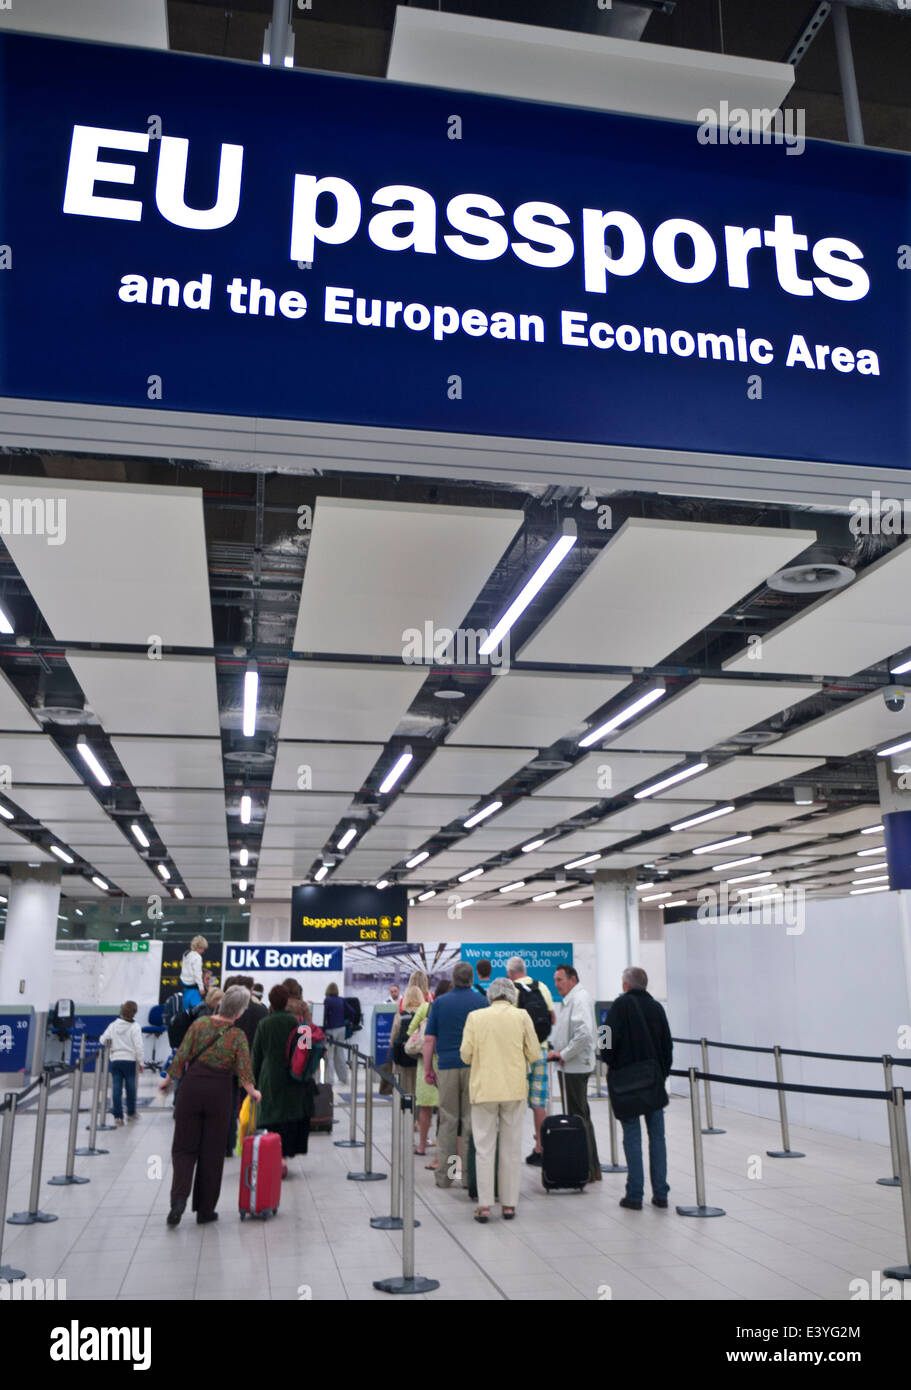 UK Border Control for EU passports at London Gatwick airport with arriving passengers waiting immigration and security clearance Stock Photo